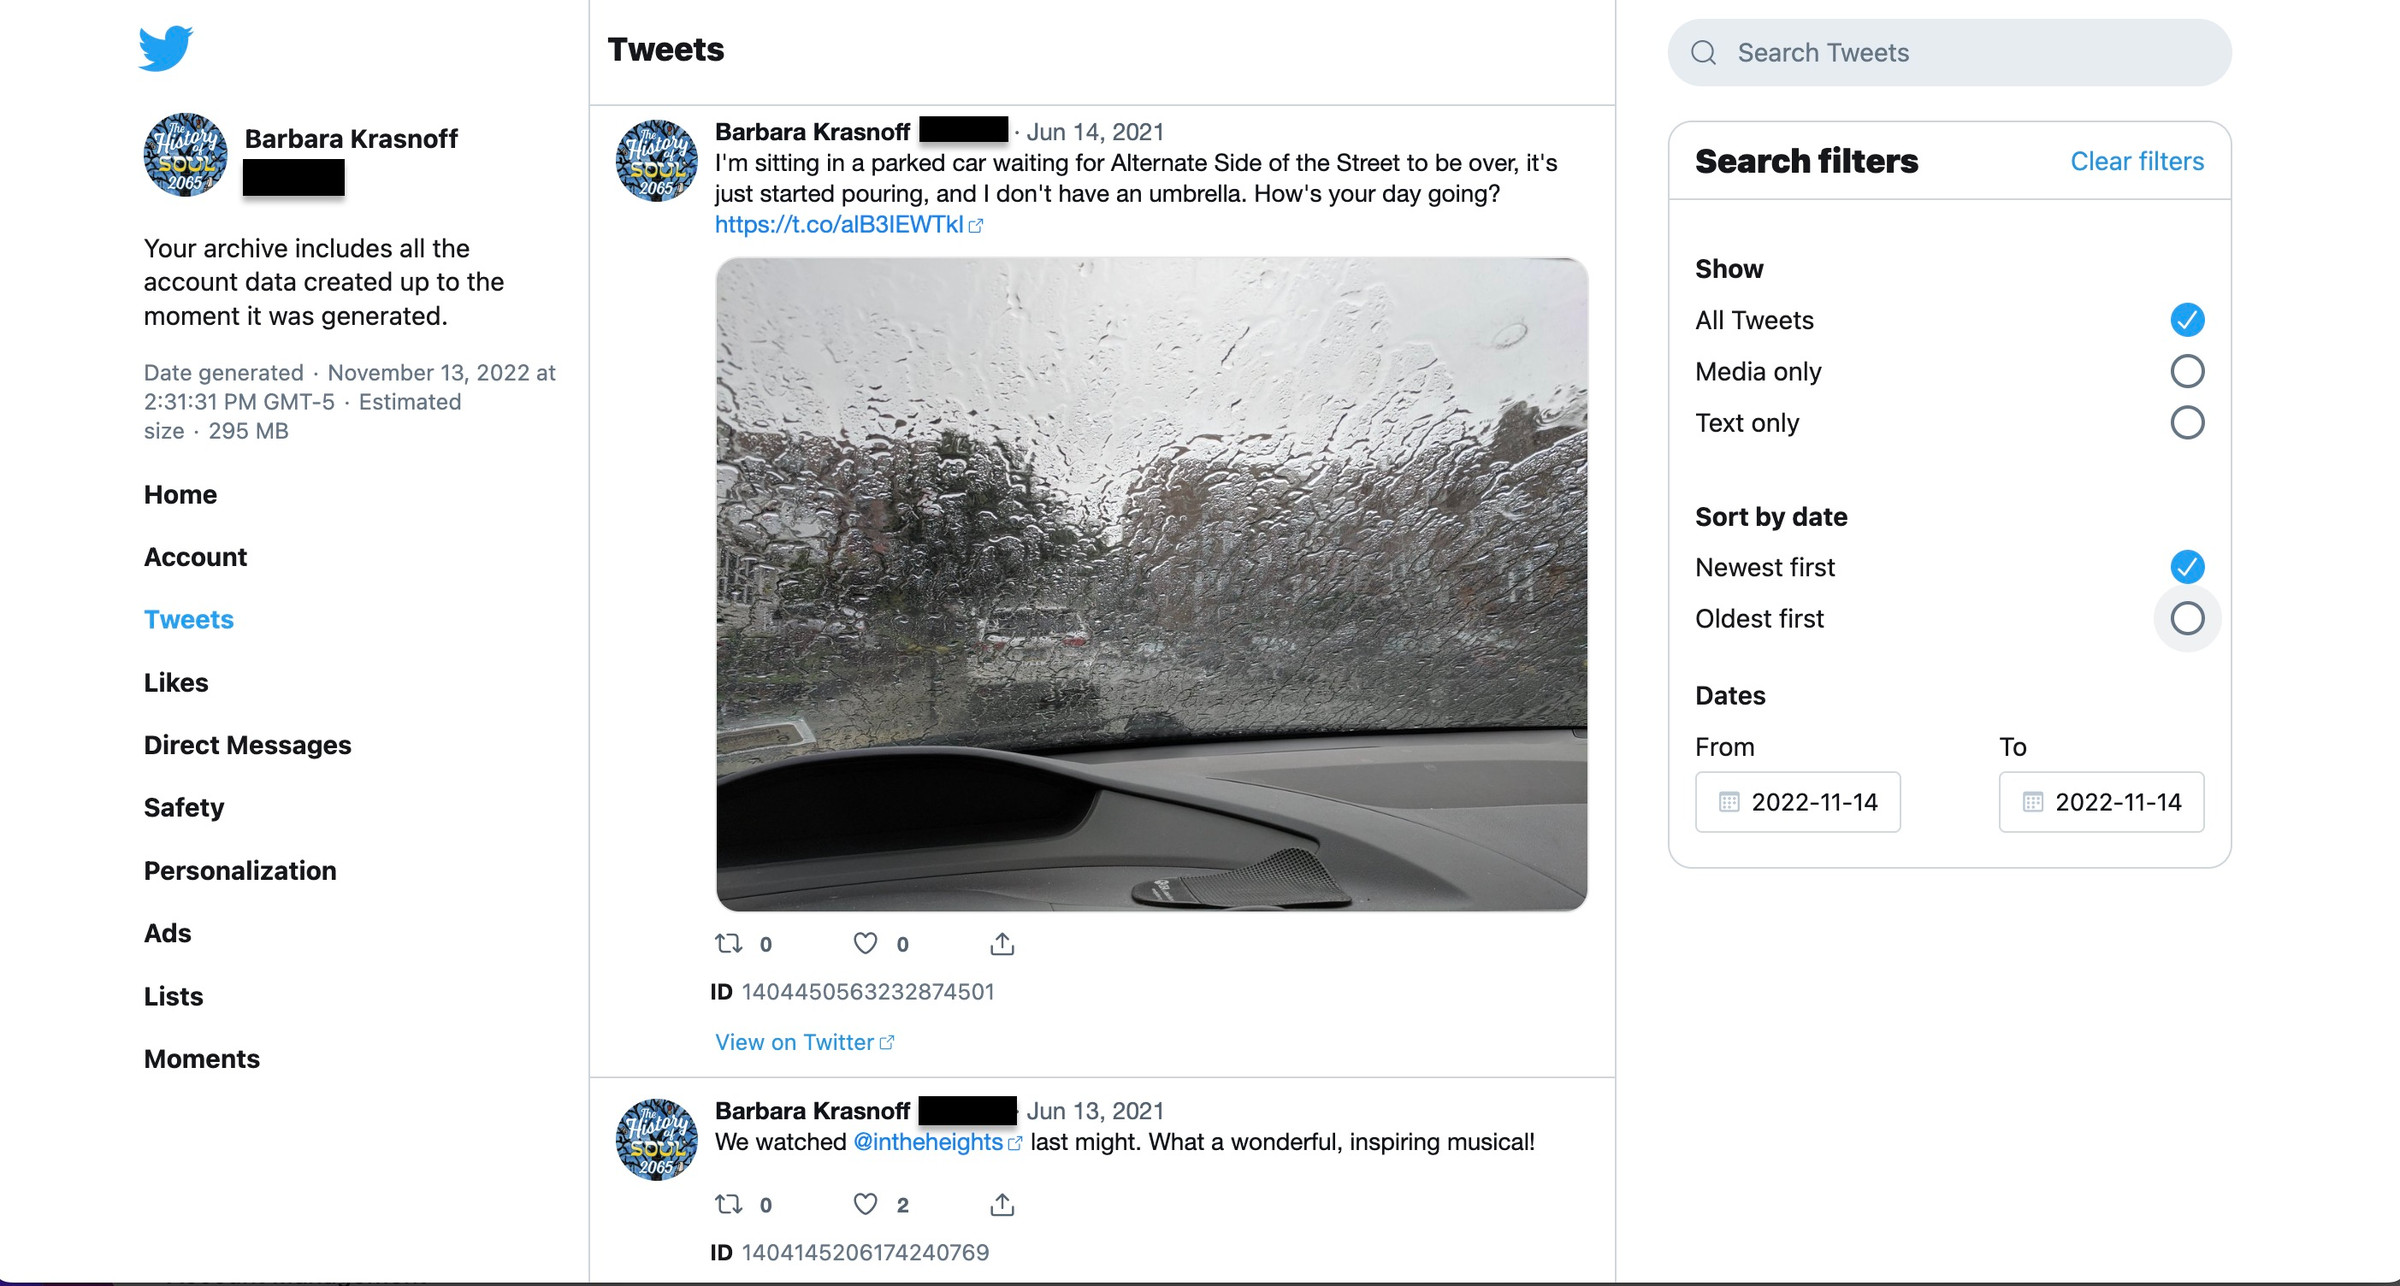 Web page showing different aspects of twitter content on the left, a tweet with a photo of a wet windshield in the center, and search filters on the right.